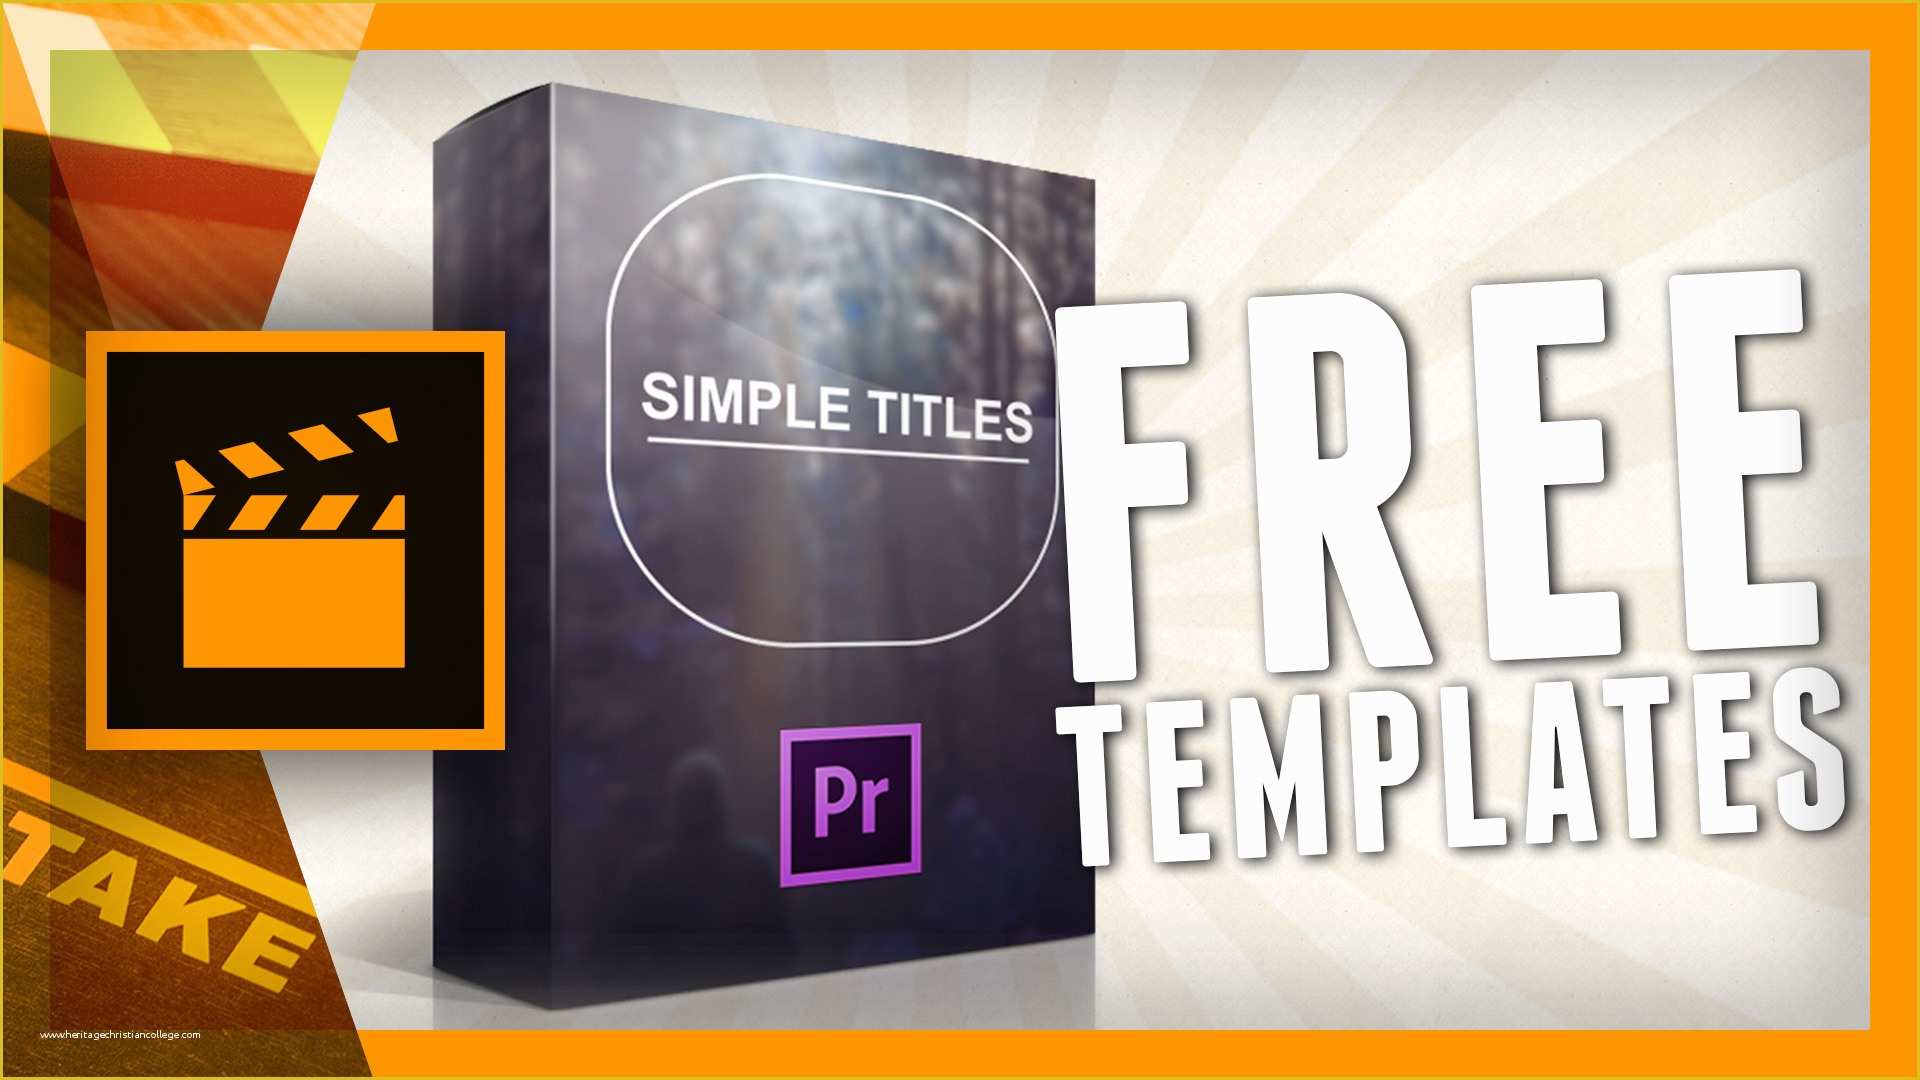 Premiere Pro Title Templates Free Download Of Simple Titles is Available for Premiere Pro Cs6